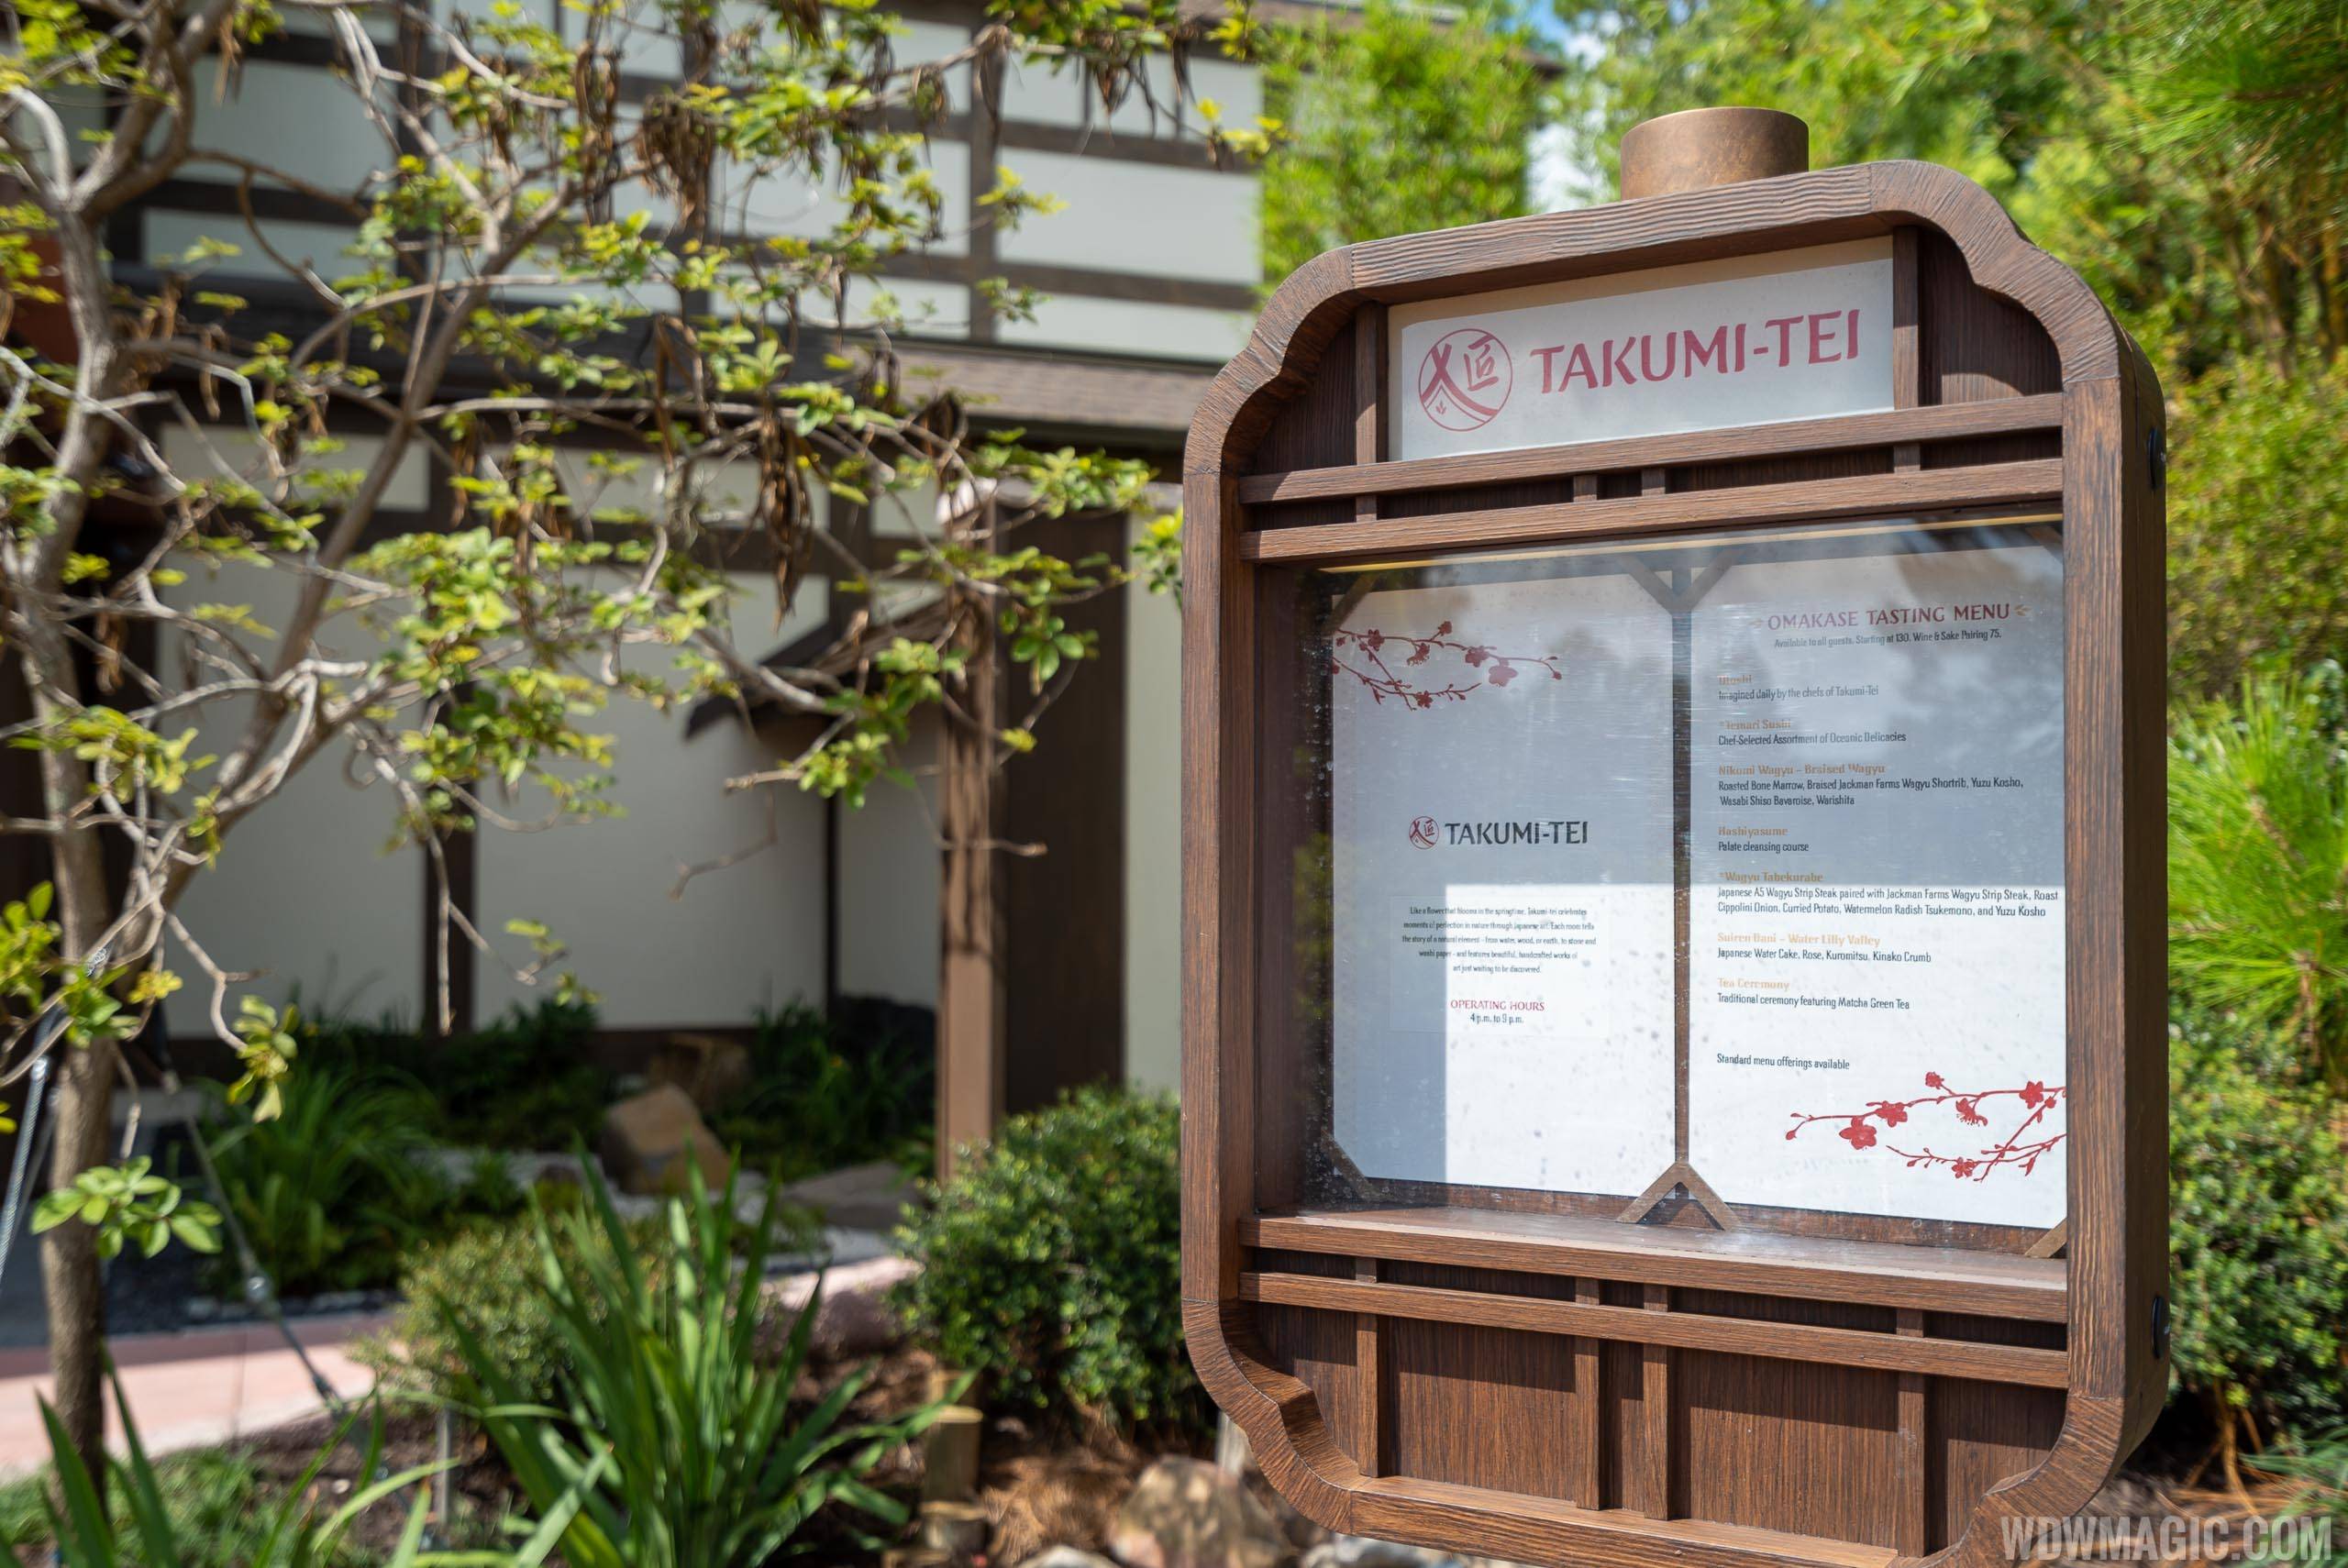 Takumi-Tei restaurant will reopen with new menu in late November at EPCOT's Japan Pavilion